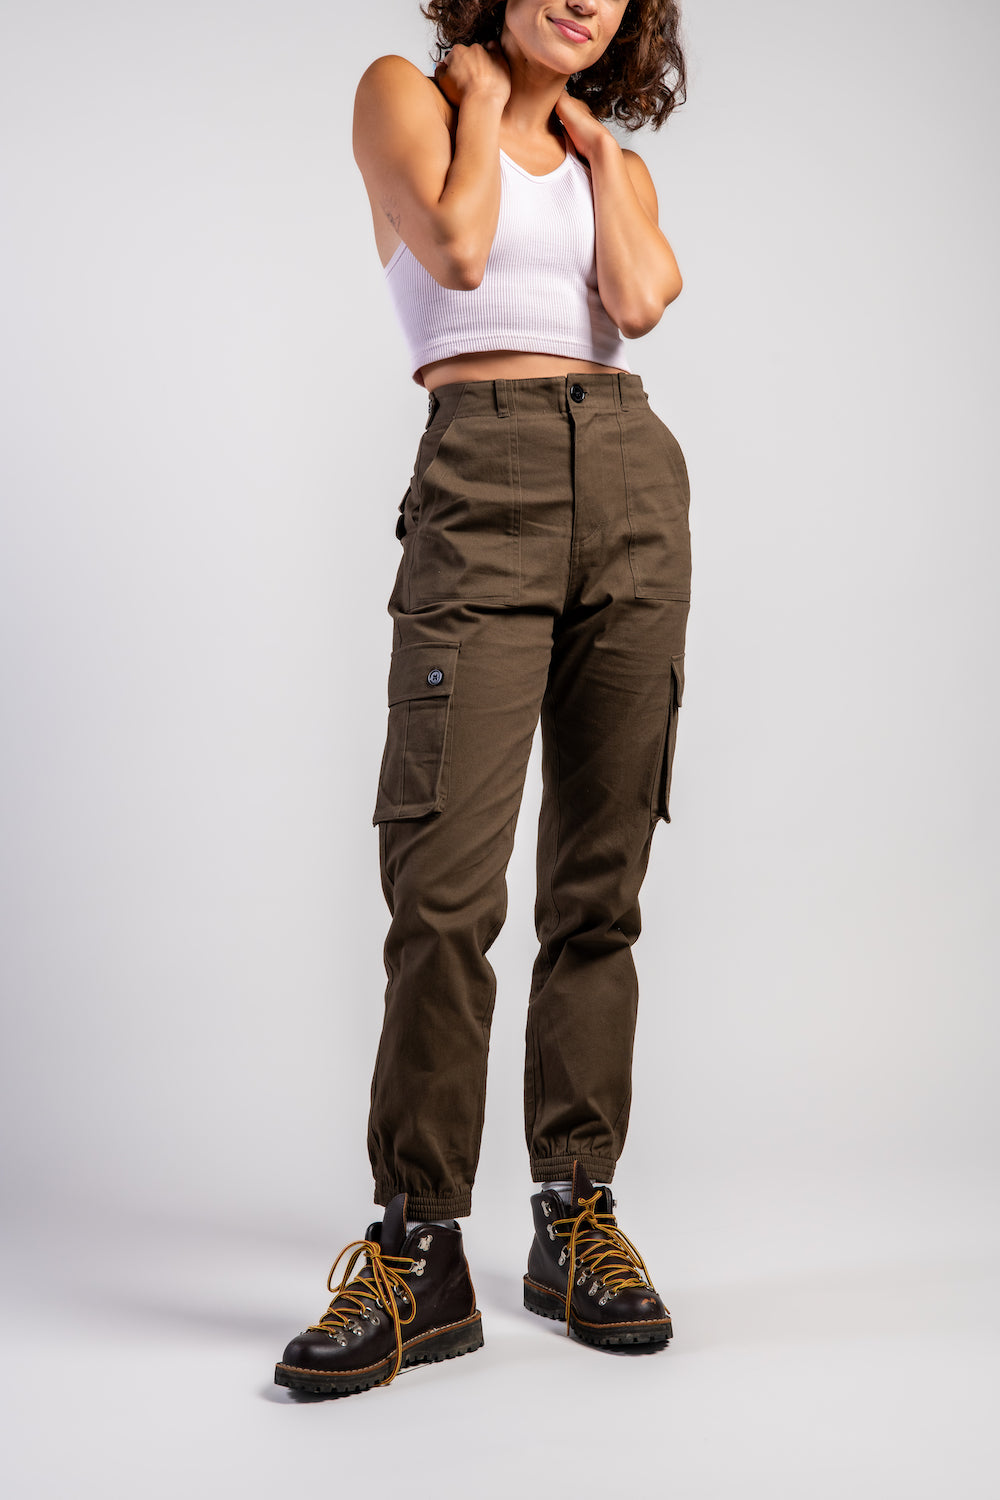 women in outdoor hiking pants and hiking boots #color_brew